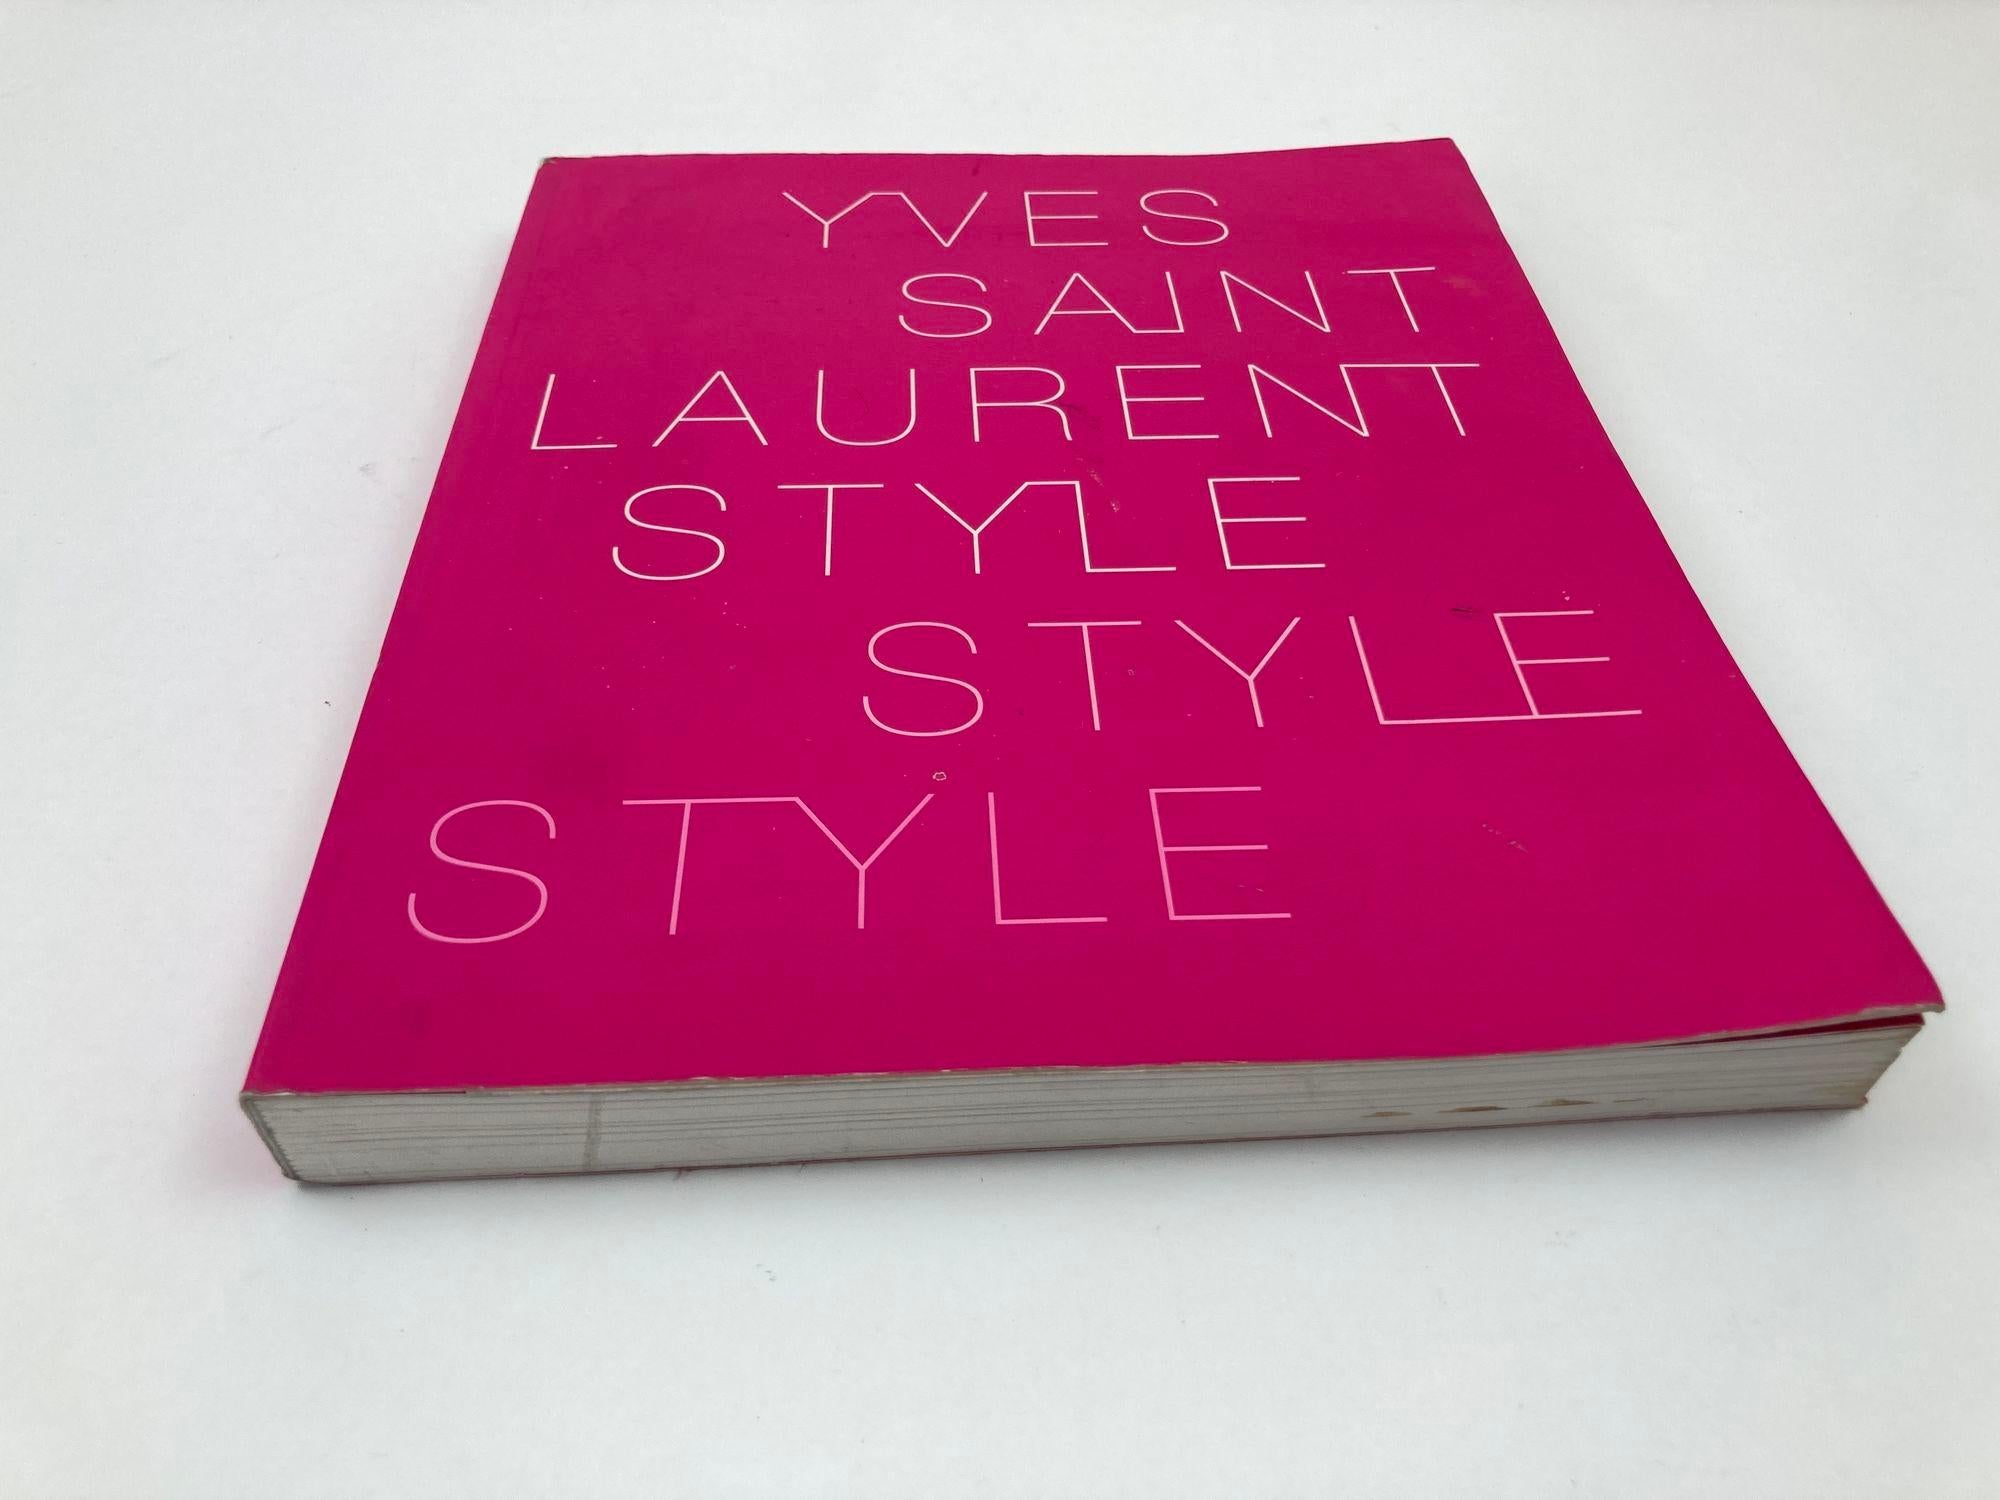 Yves Saint Laurent: Style Paperback 2008 by Foundation Pierre Berge Pink book.
In collaboration with Fondation Pierre Bergé–Yves Saint Laurent.
Yves Saint Laurent’s signature style intertwines references from the art world with those of popular